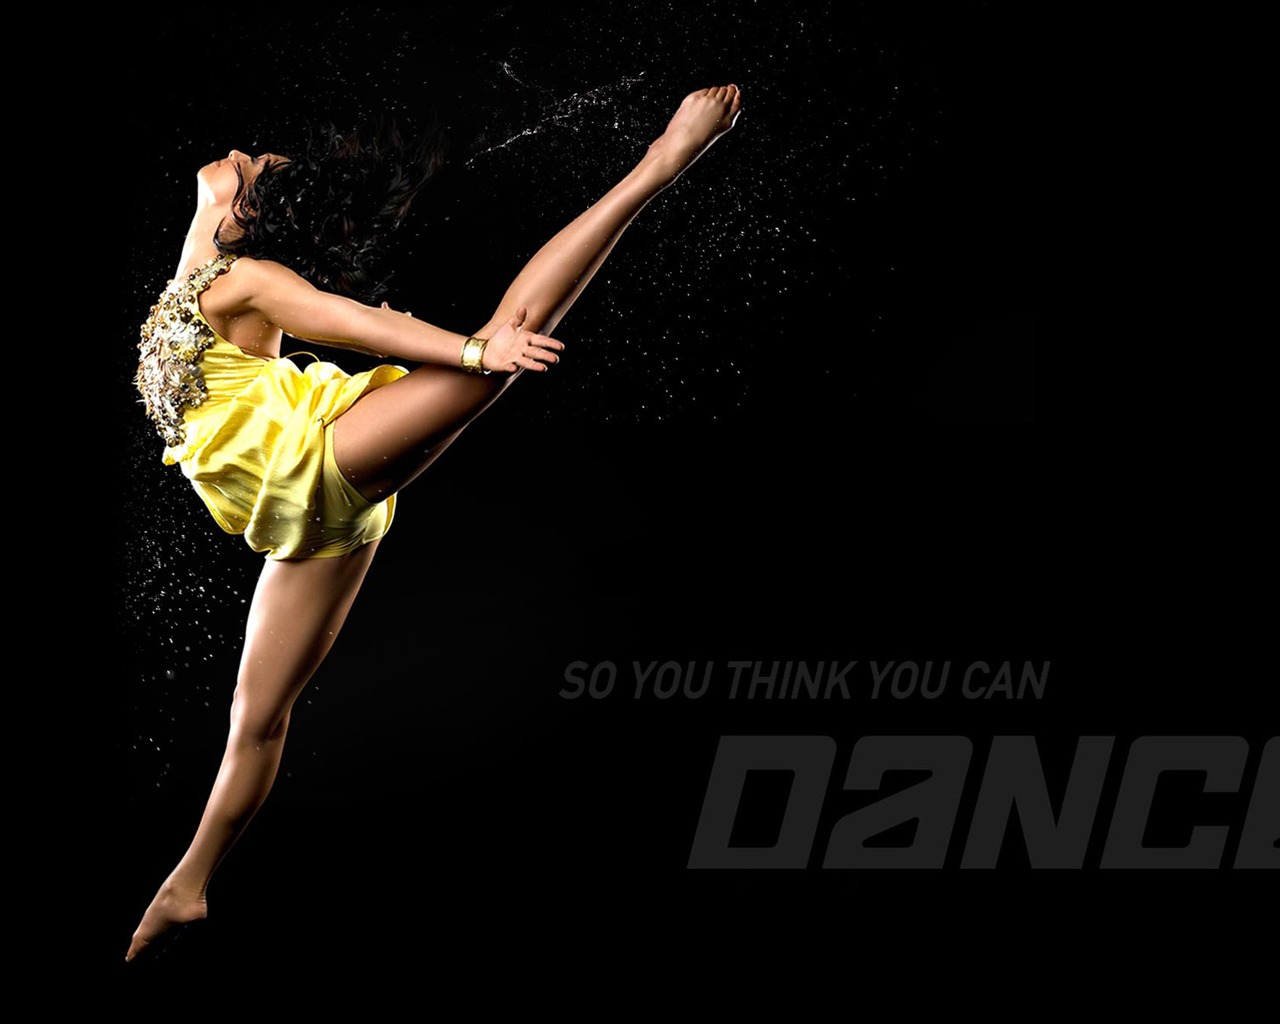 So You Think You Can Dance wallpaper (1) #19 - 1280x1024